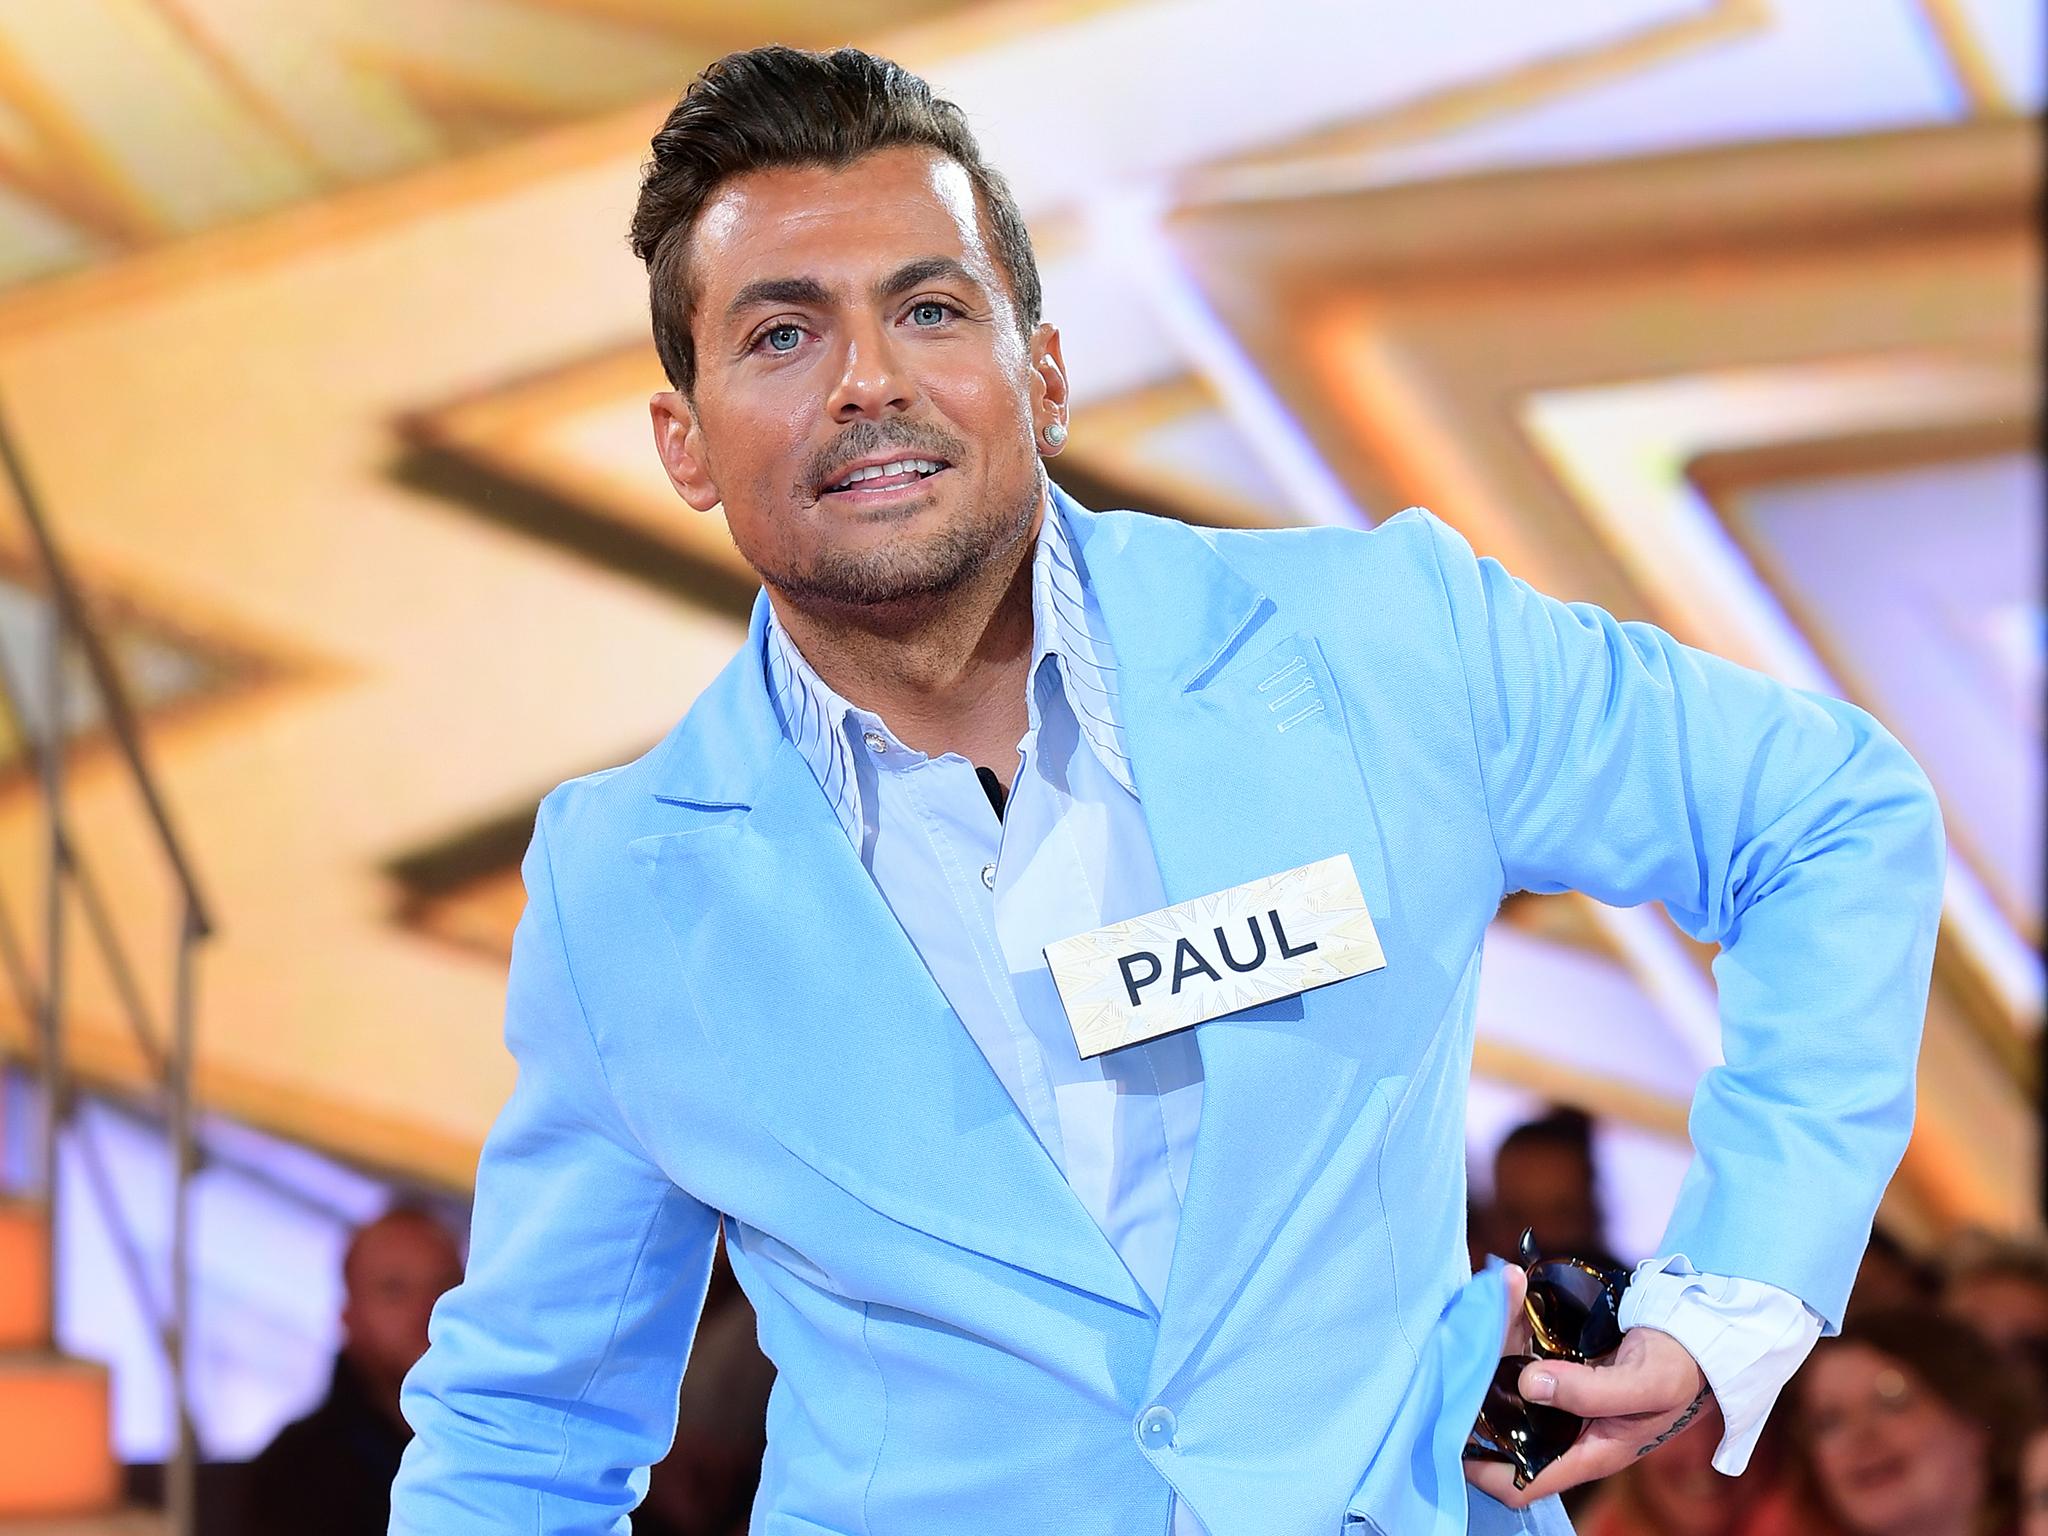 Paul Danan has appeared on a number of reality shows